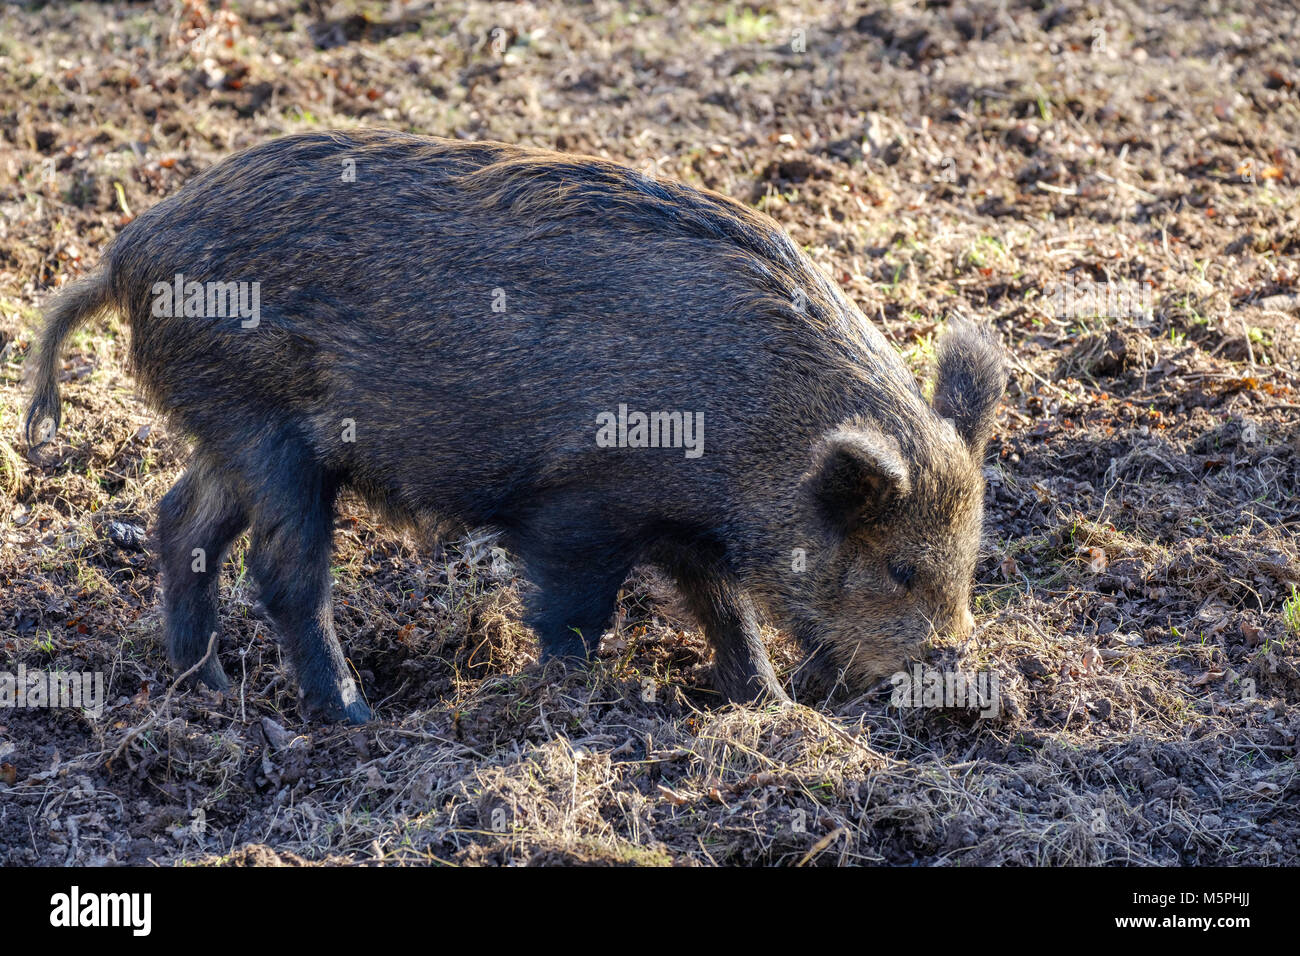 WILD BOAR IN FOREST OF DEAN, GLOUCESTERSHIRE,ENGLAND TURNING OVER GROUND IN SEARCH OF FOOD> Stock Photo